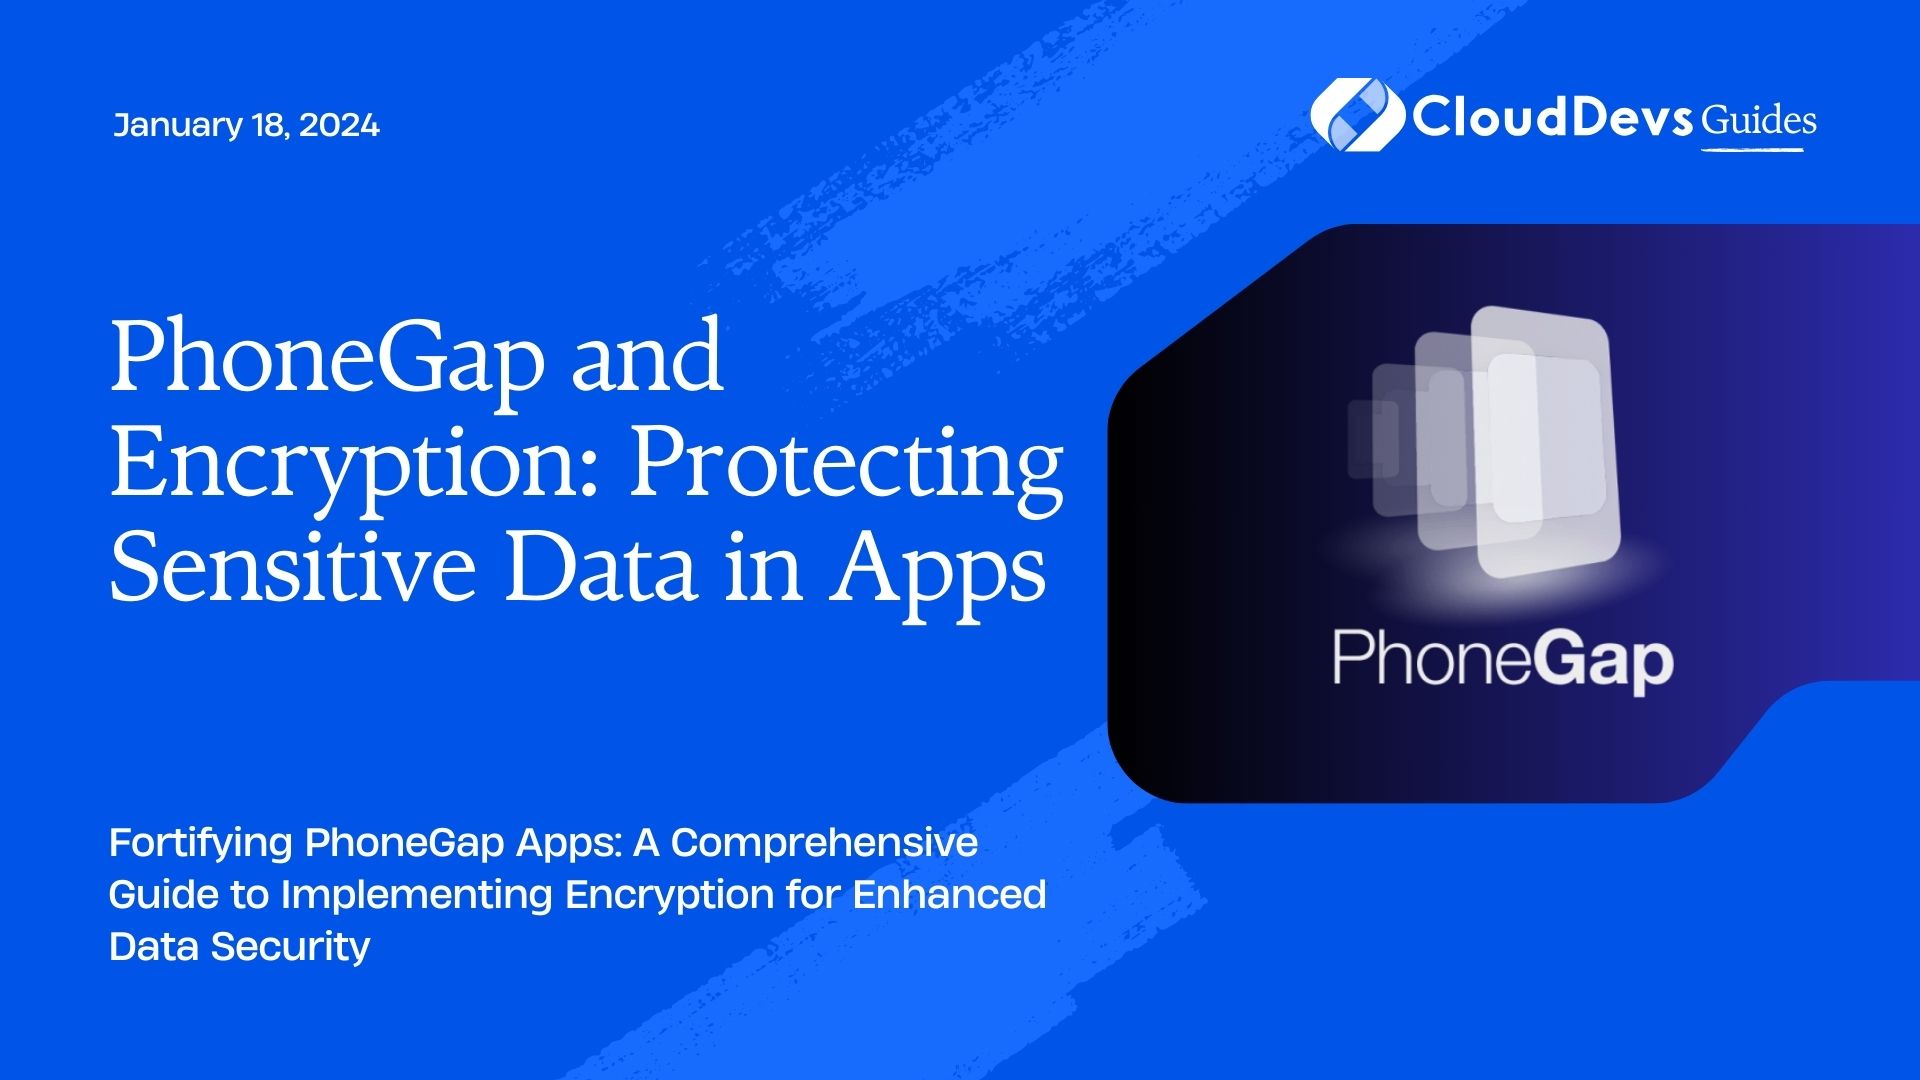 PhoneGap and Encryption: Protecting Sensitive Data in Apps